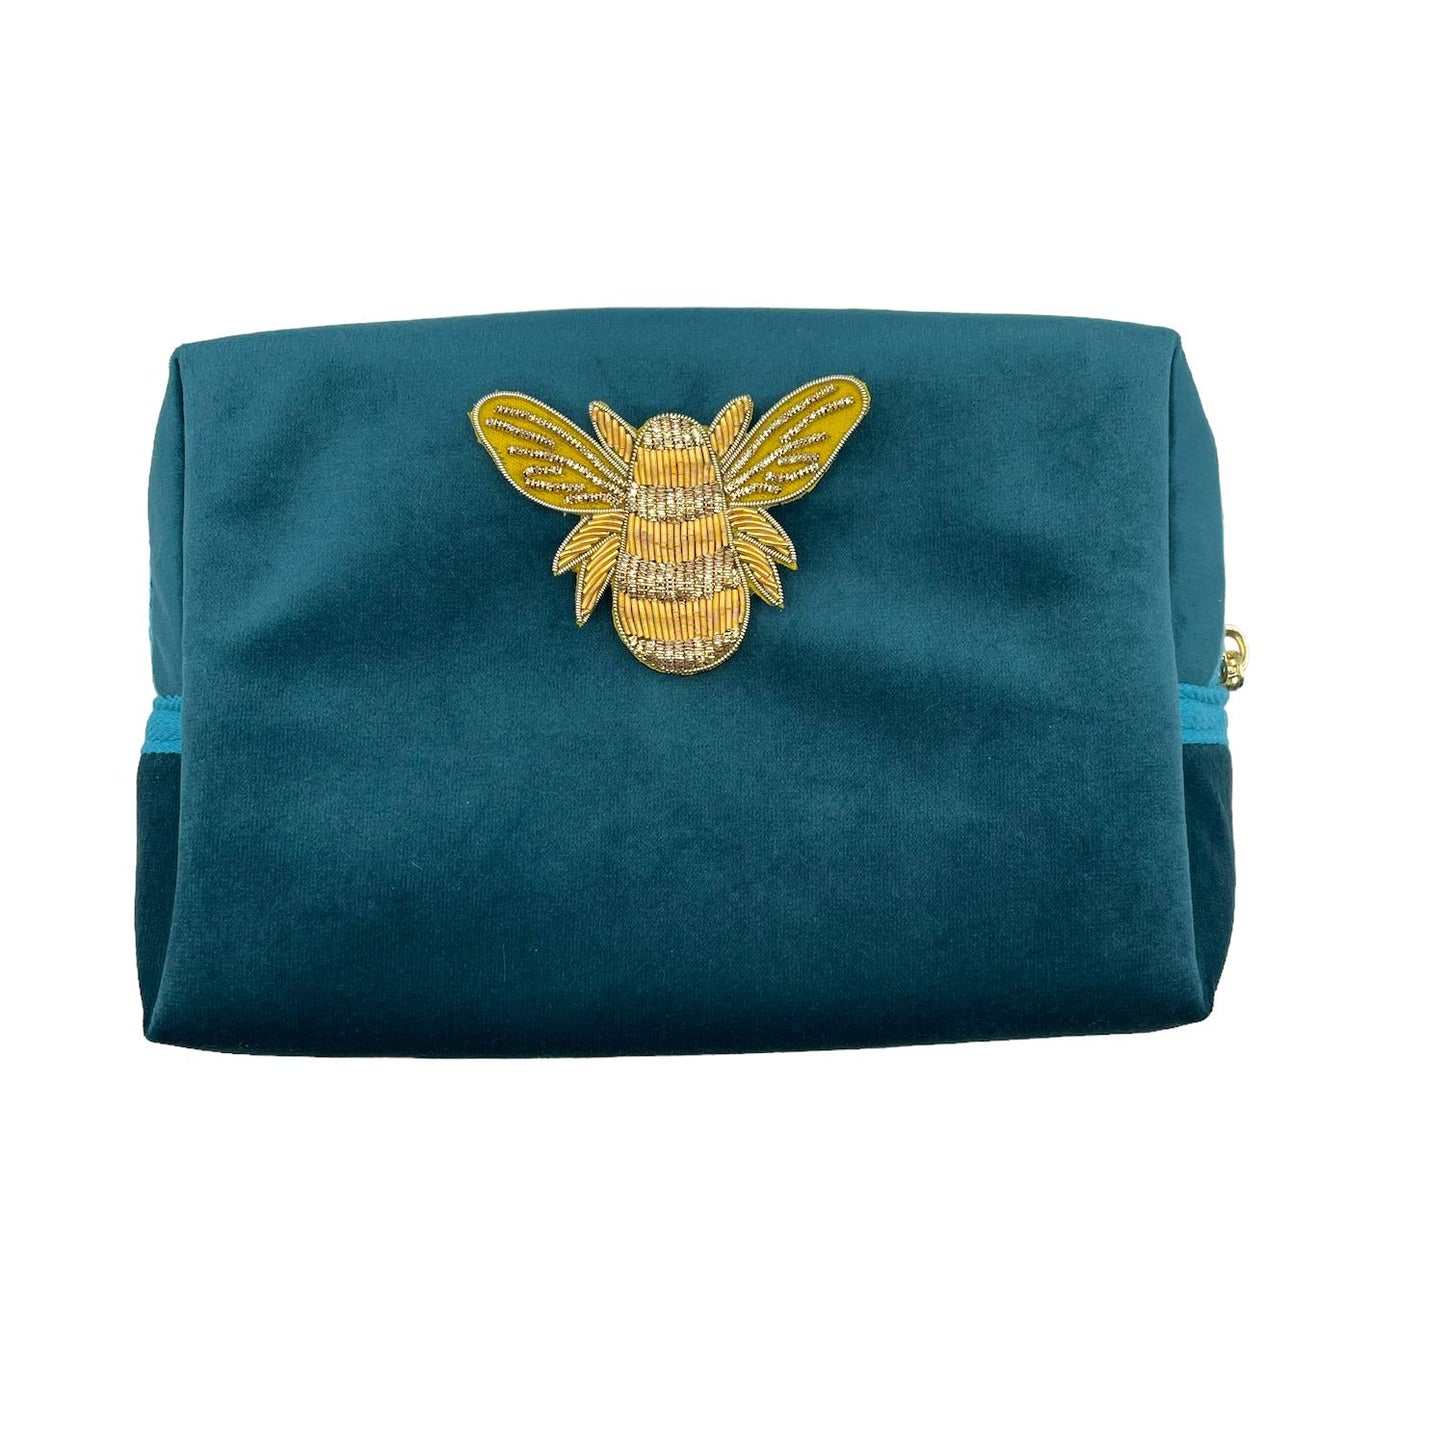 Teal make-up bag & gold bee pin - recycled velvet